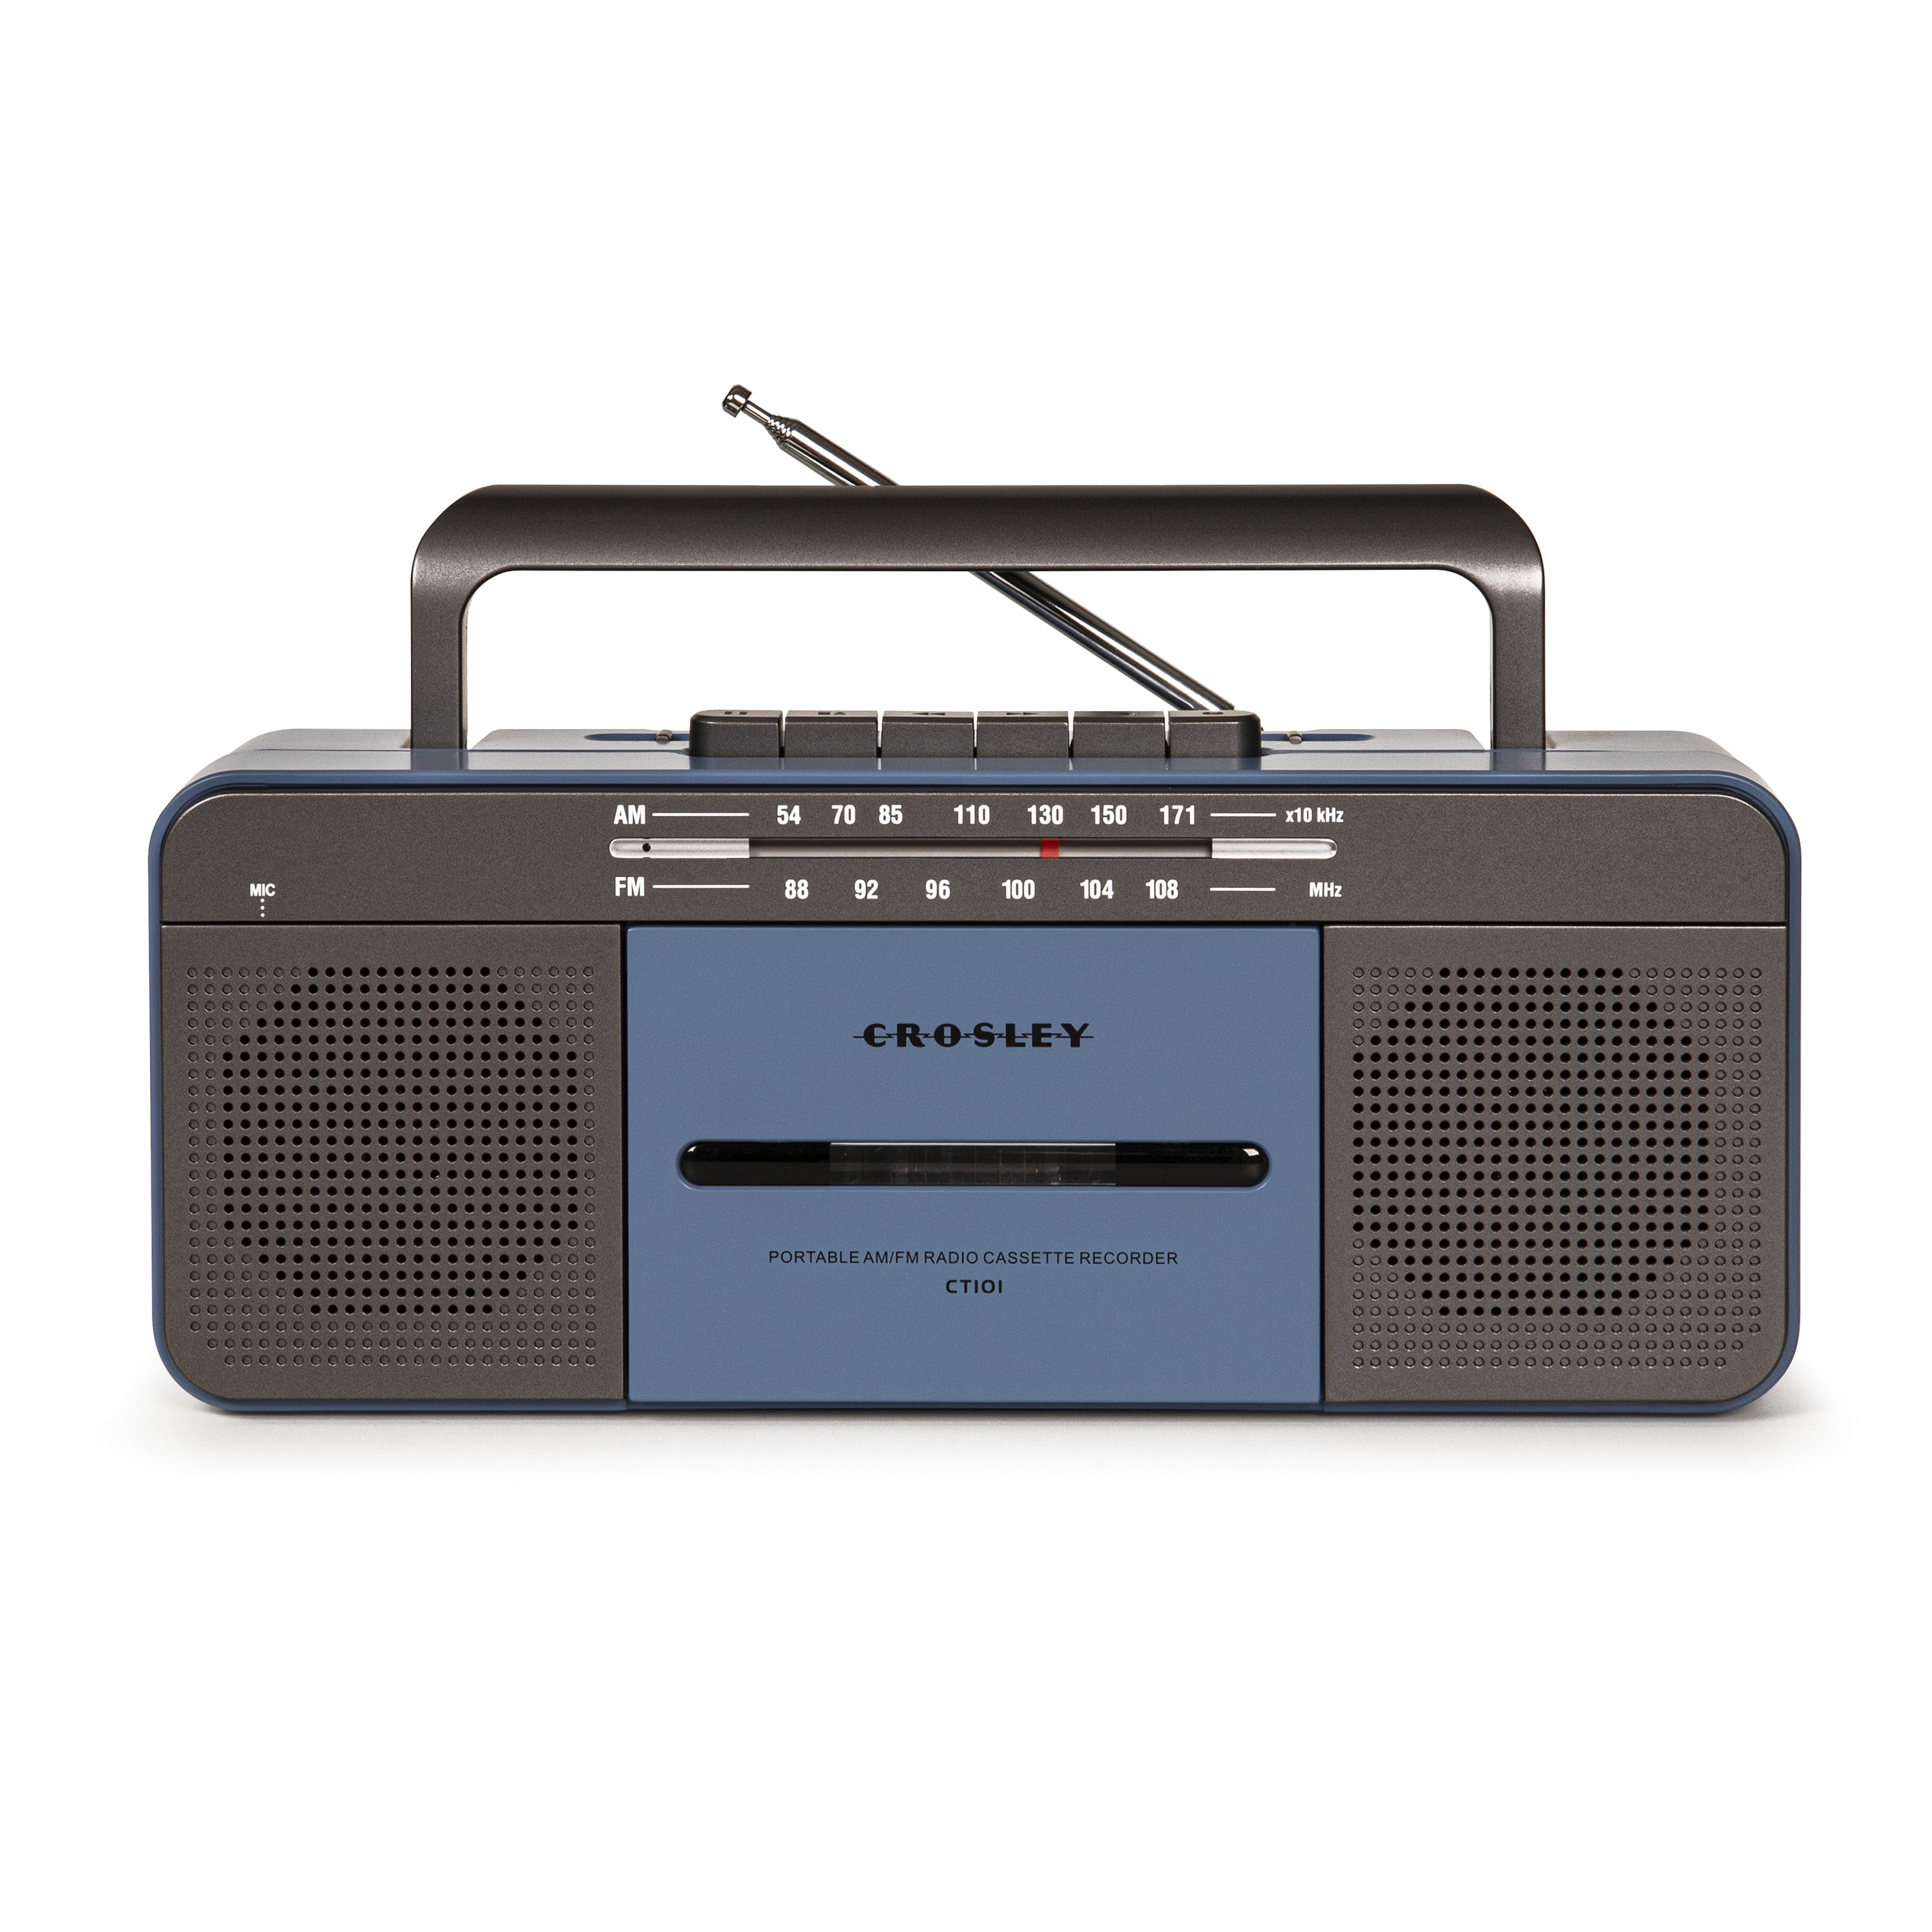 Wireless Music Streaming/FM/USB/AUX/Headphone Jack PUMPKIN Rechargeable CD Player Boombox Portable Radio Built-in 2000mAh Lithium Battery 